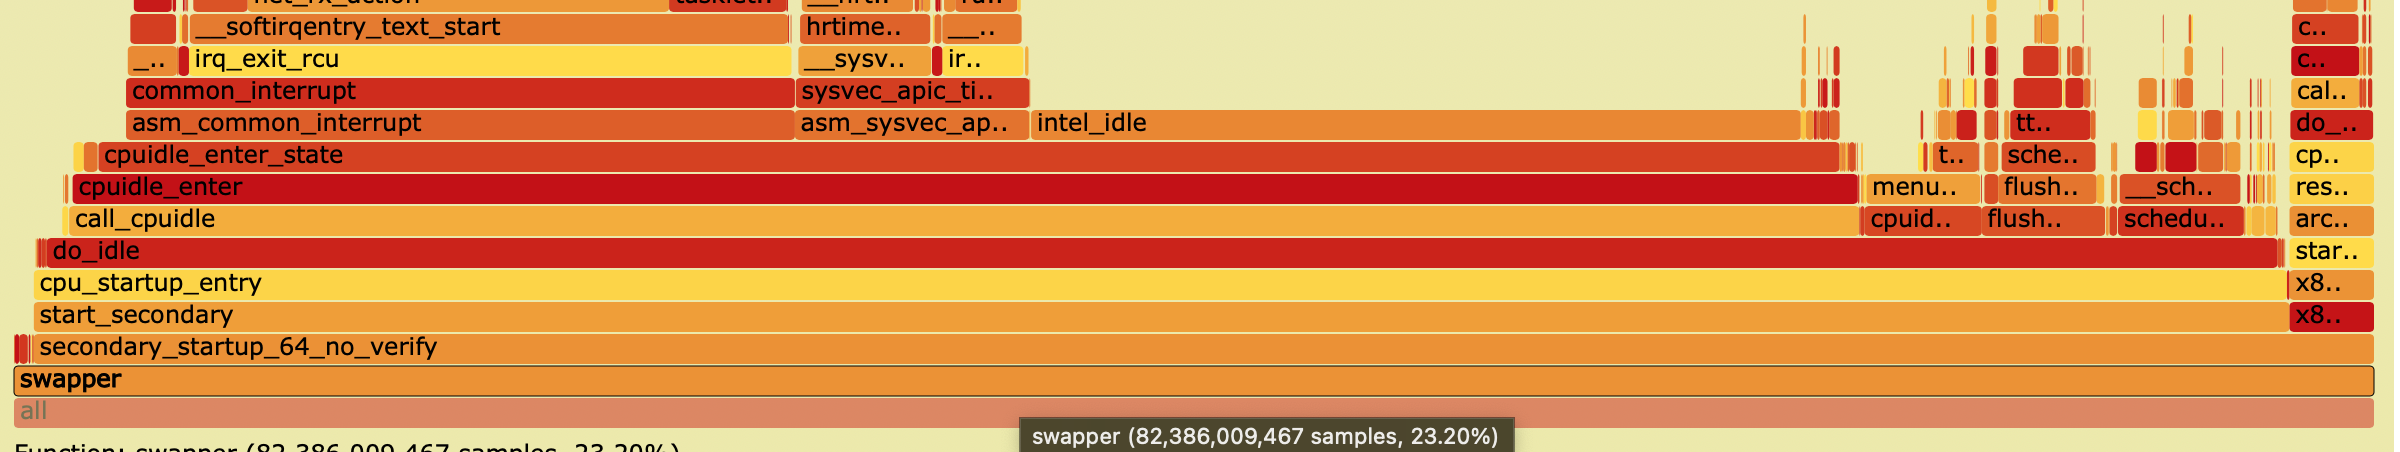 Perf swapper 5 15 Slow.png